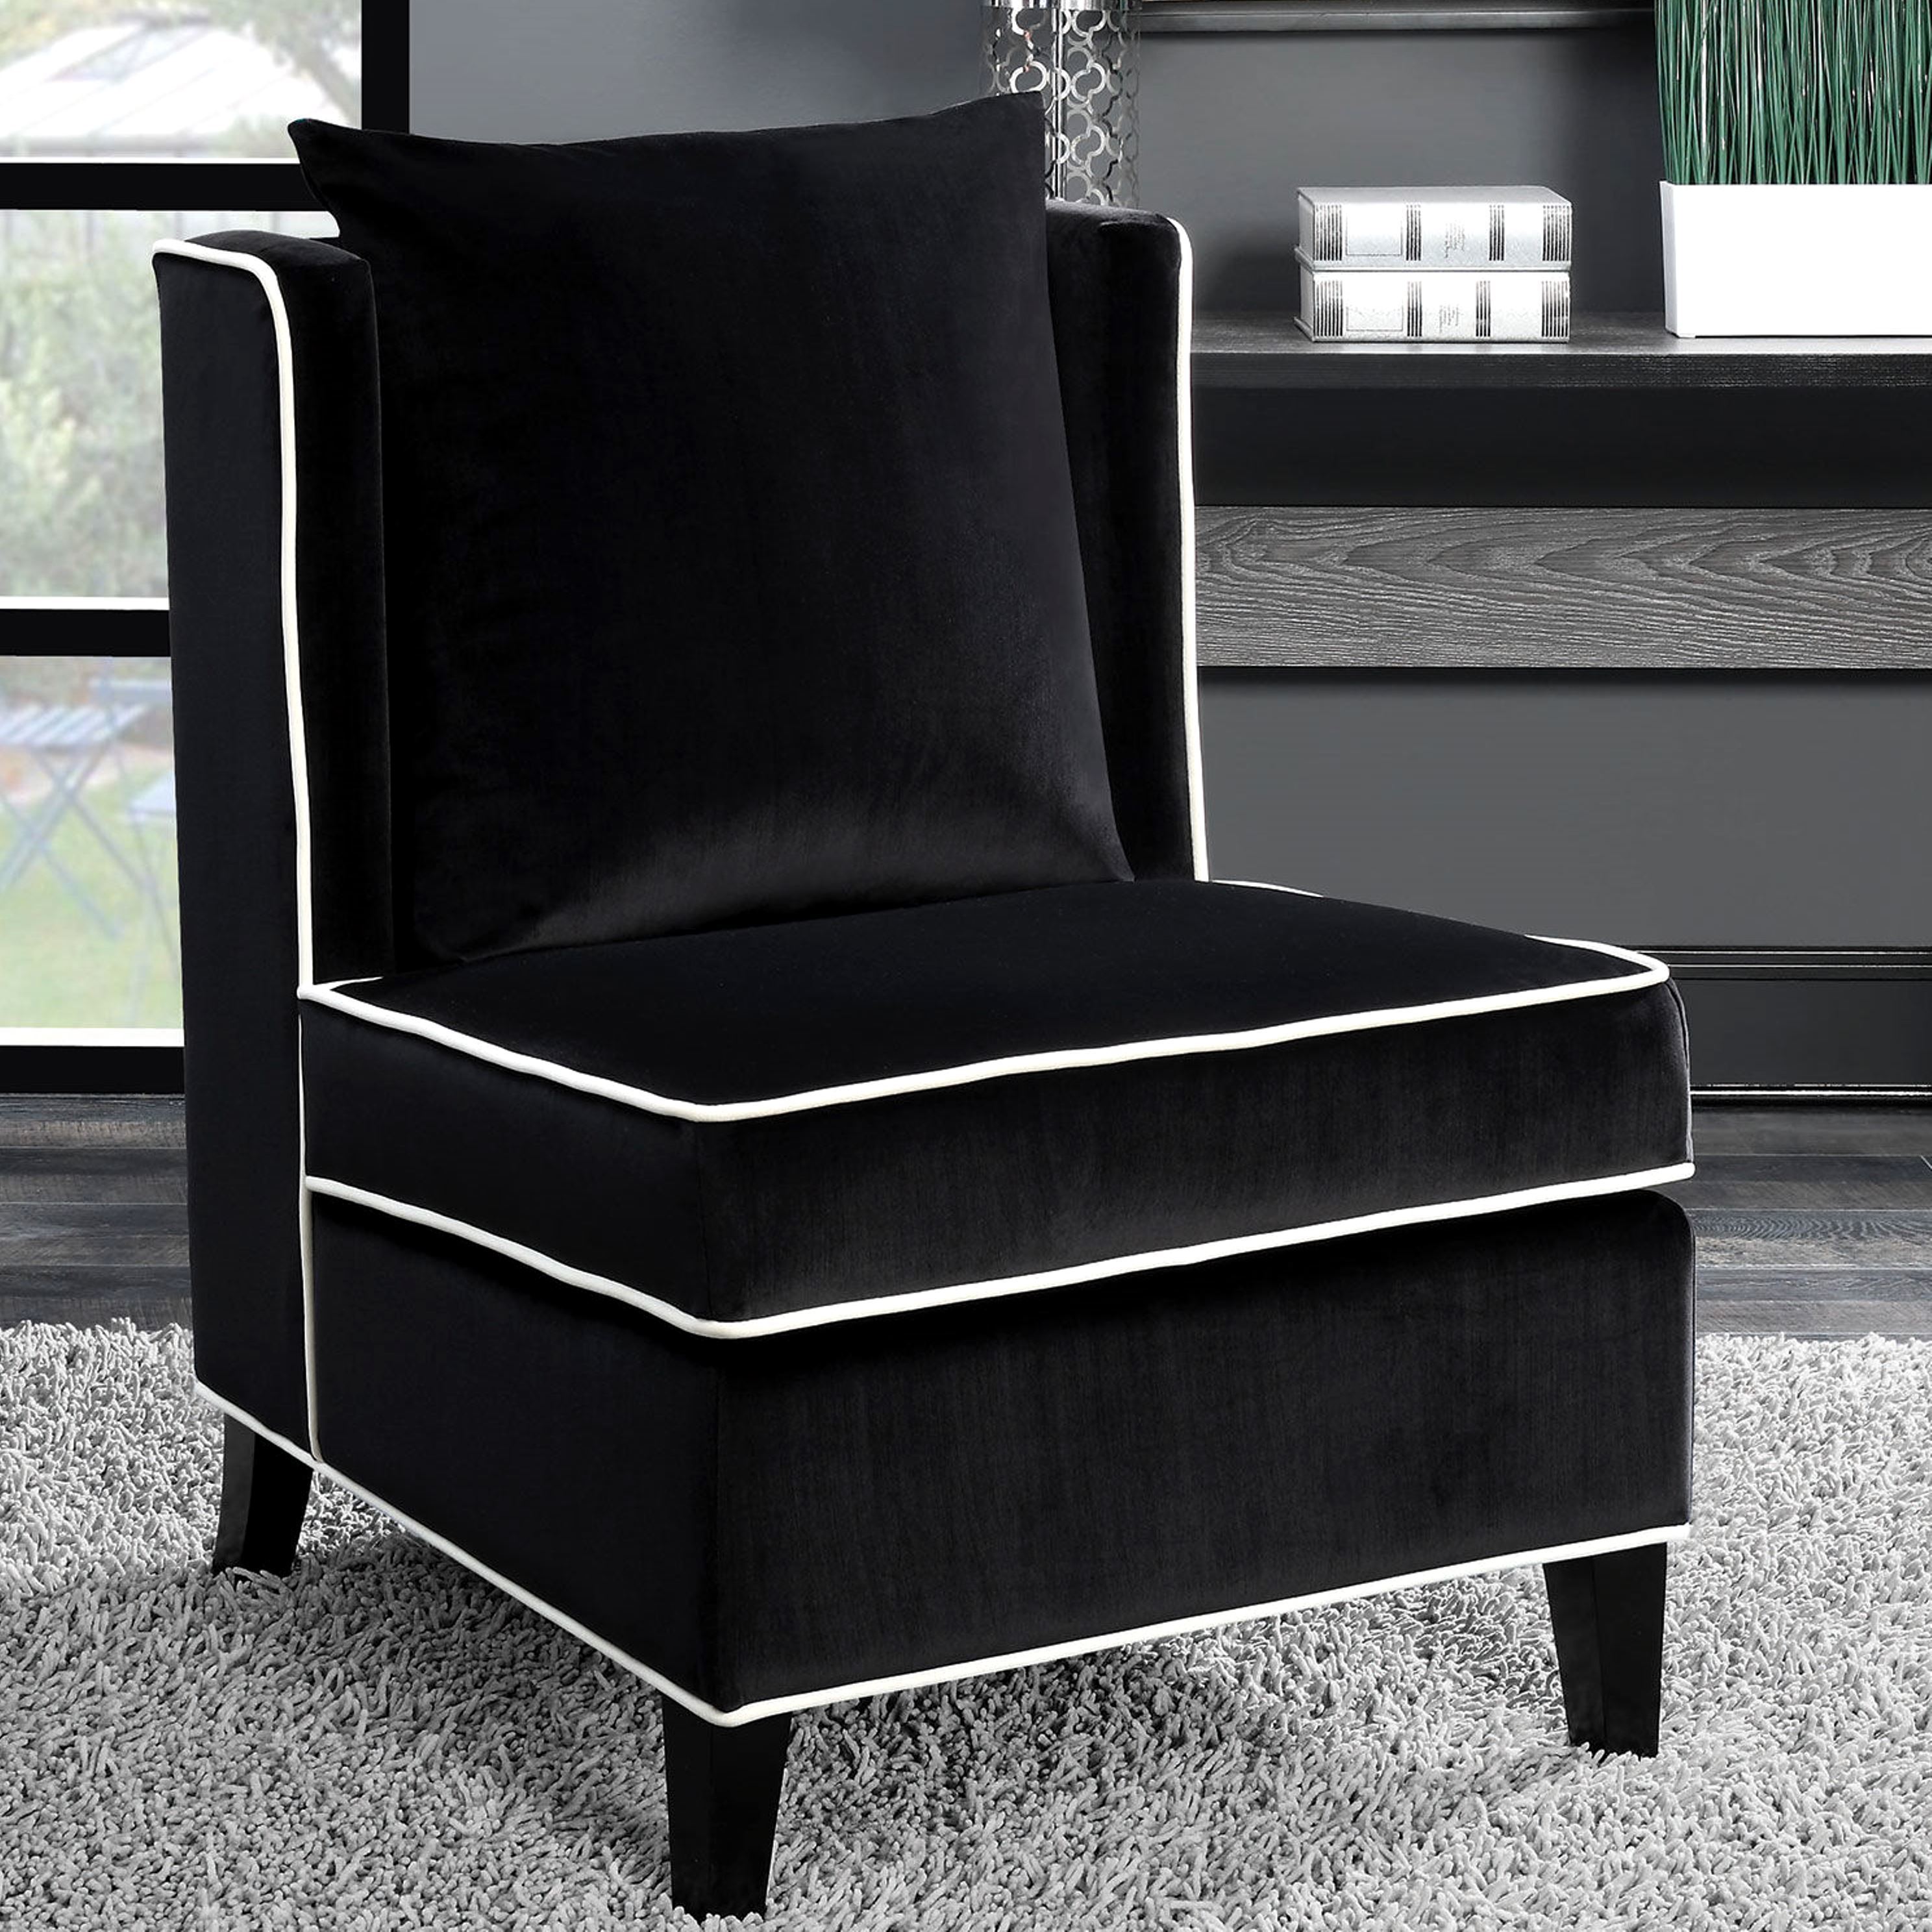 Living Room Black Velvet Accent Chair With White Piping 6f149262 5177 493f 8e5e A96478ede996 